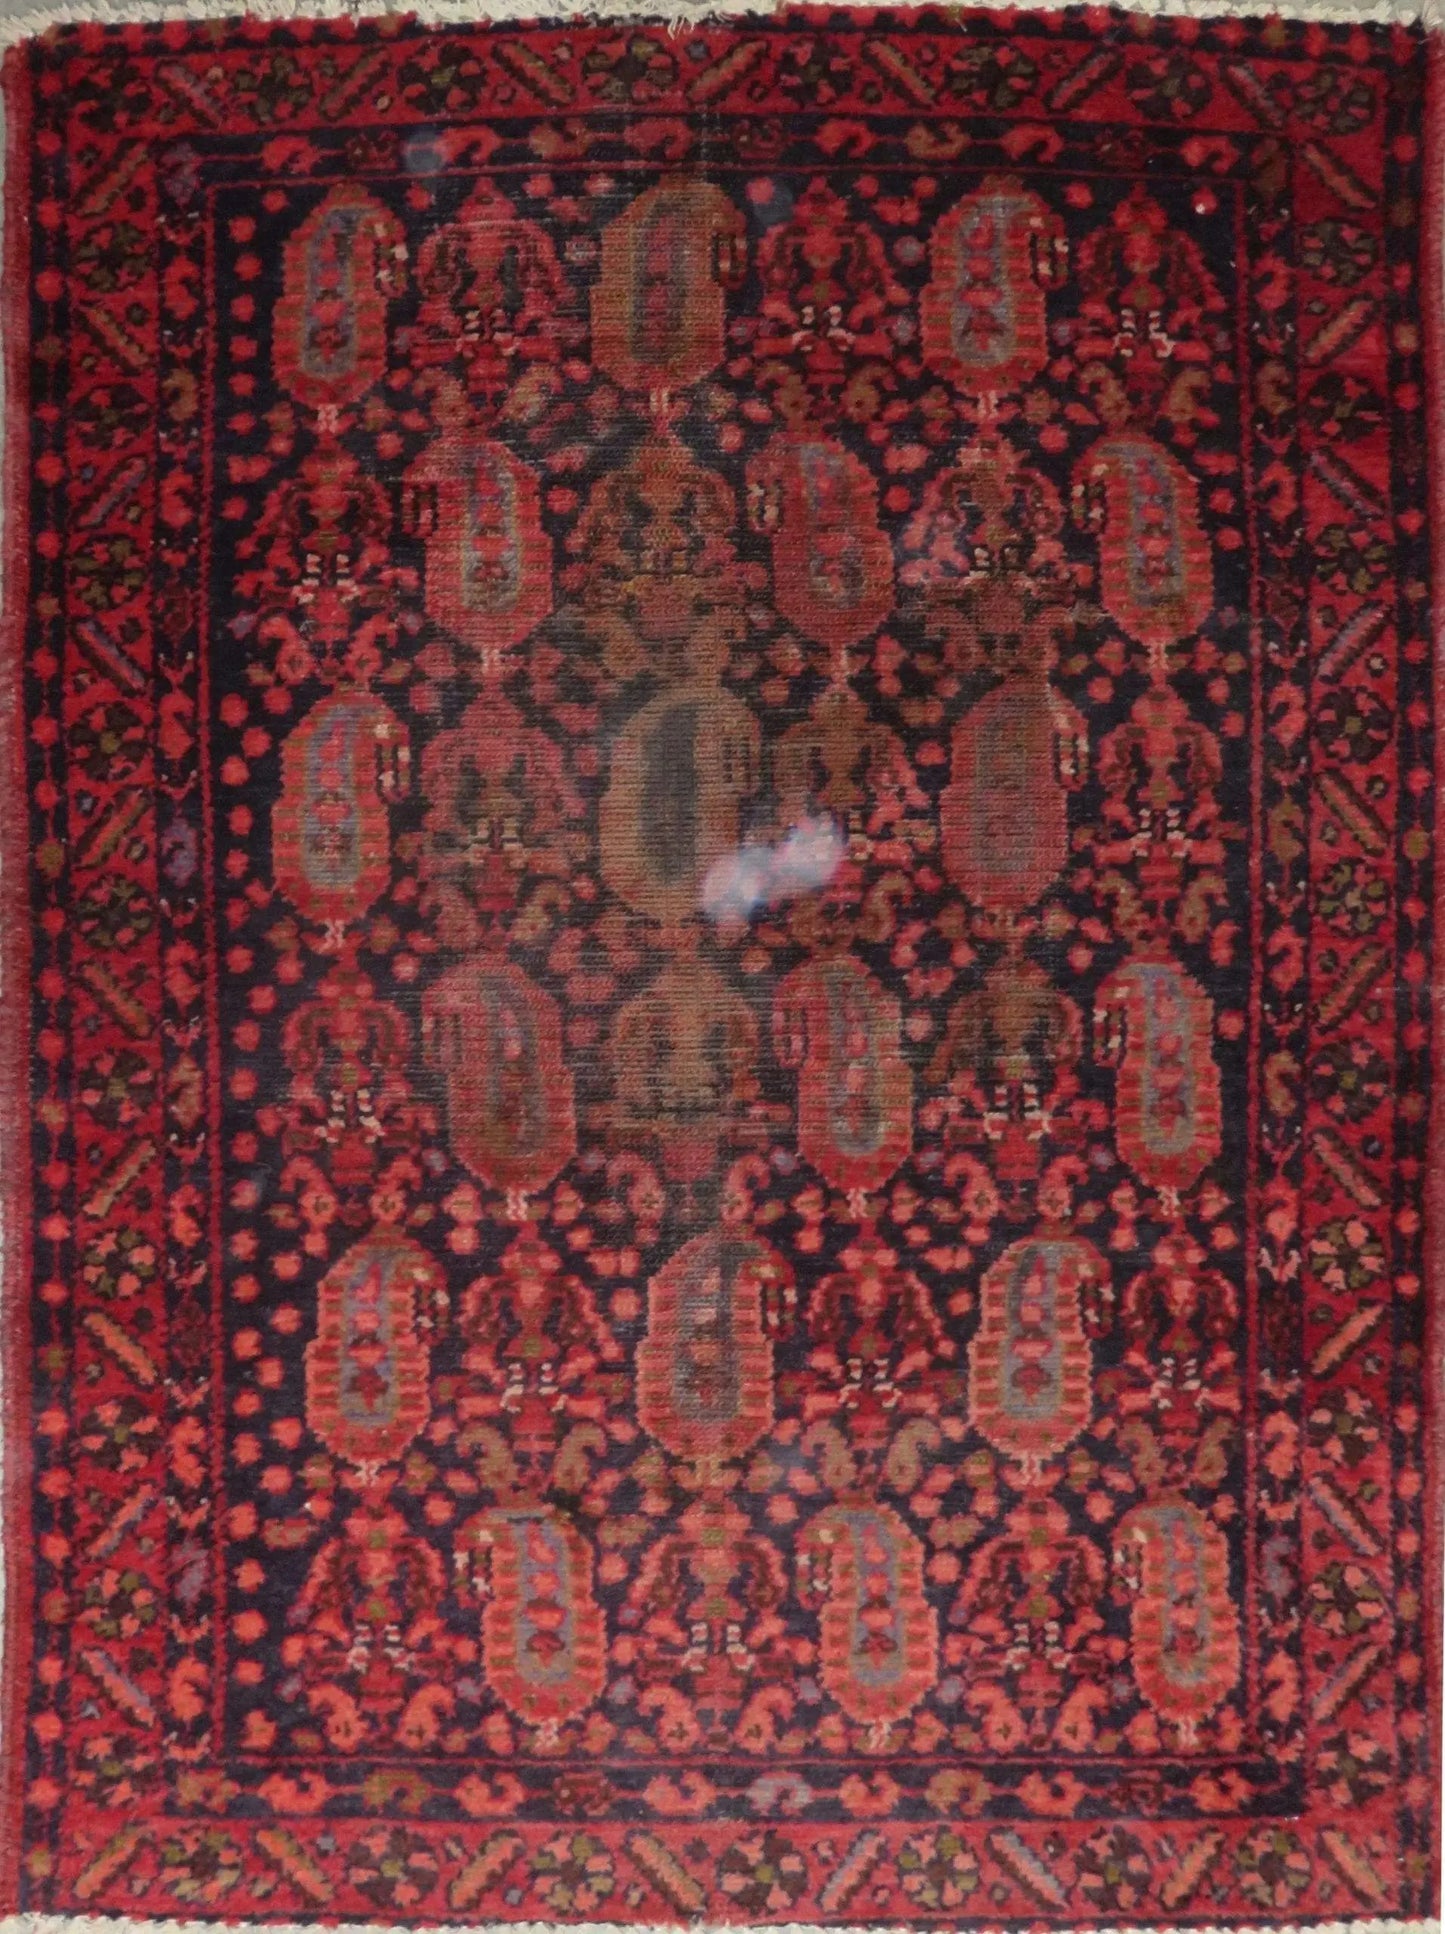 Hand-Knotted Vintage Rug 4'7" x 3'6"